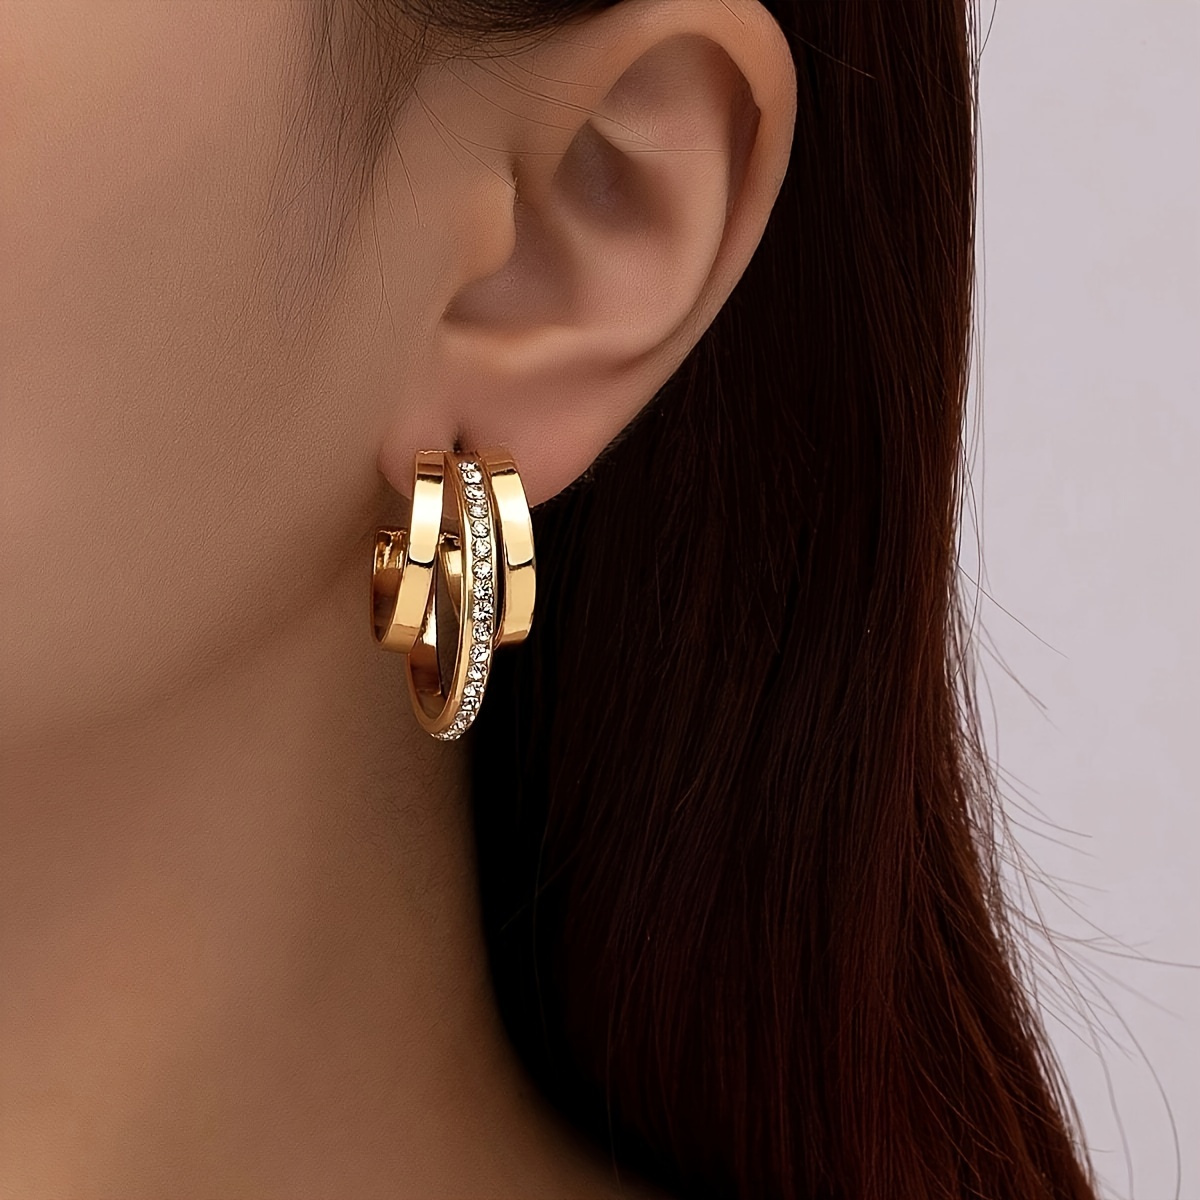 

3 Layer C Shaped Hoop Earrings Alloy Jewelry With Tiny Zircon Inlaid Elegant Sexy Style For Women Dating Ear Decor